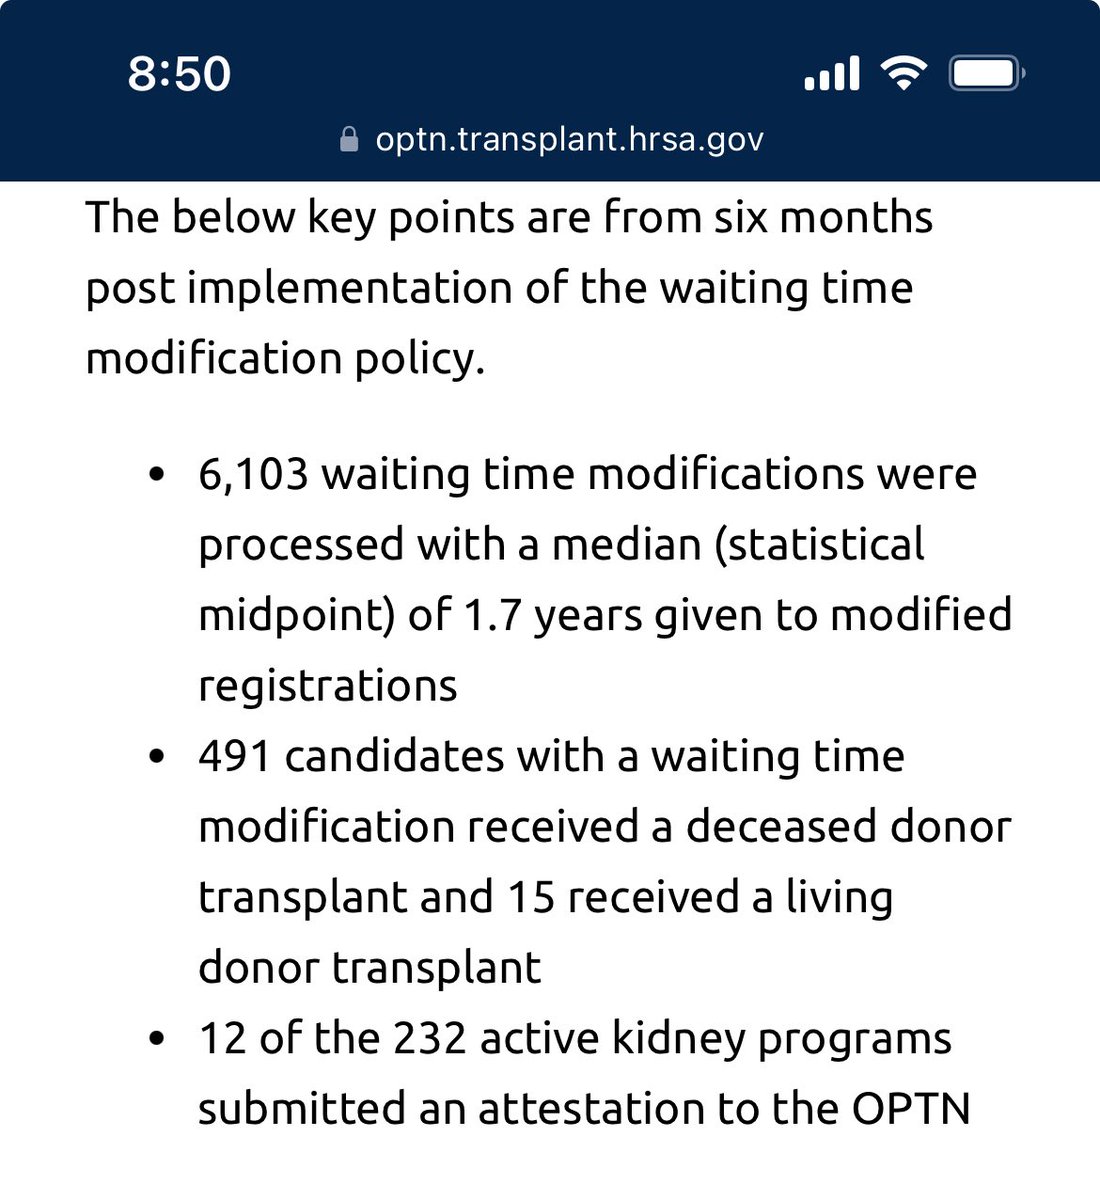 I’m happy to announce the 6 month results from the SECOND @UNOSNews policy surrounding the elimination of Black race to diagnose and manage kidney disease. This policy required all US transplant centers review their waitlists and modify time for qualifying Black individuals.